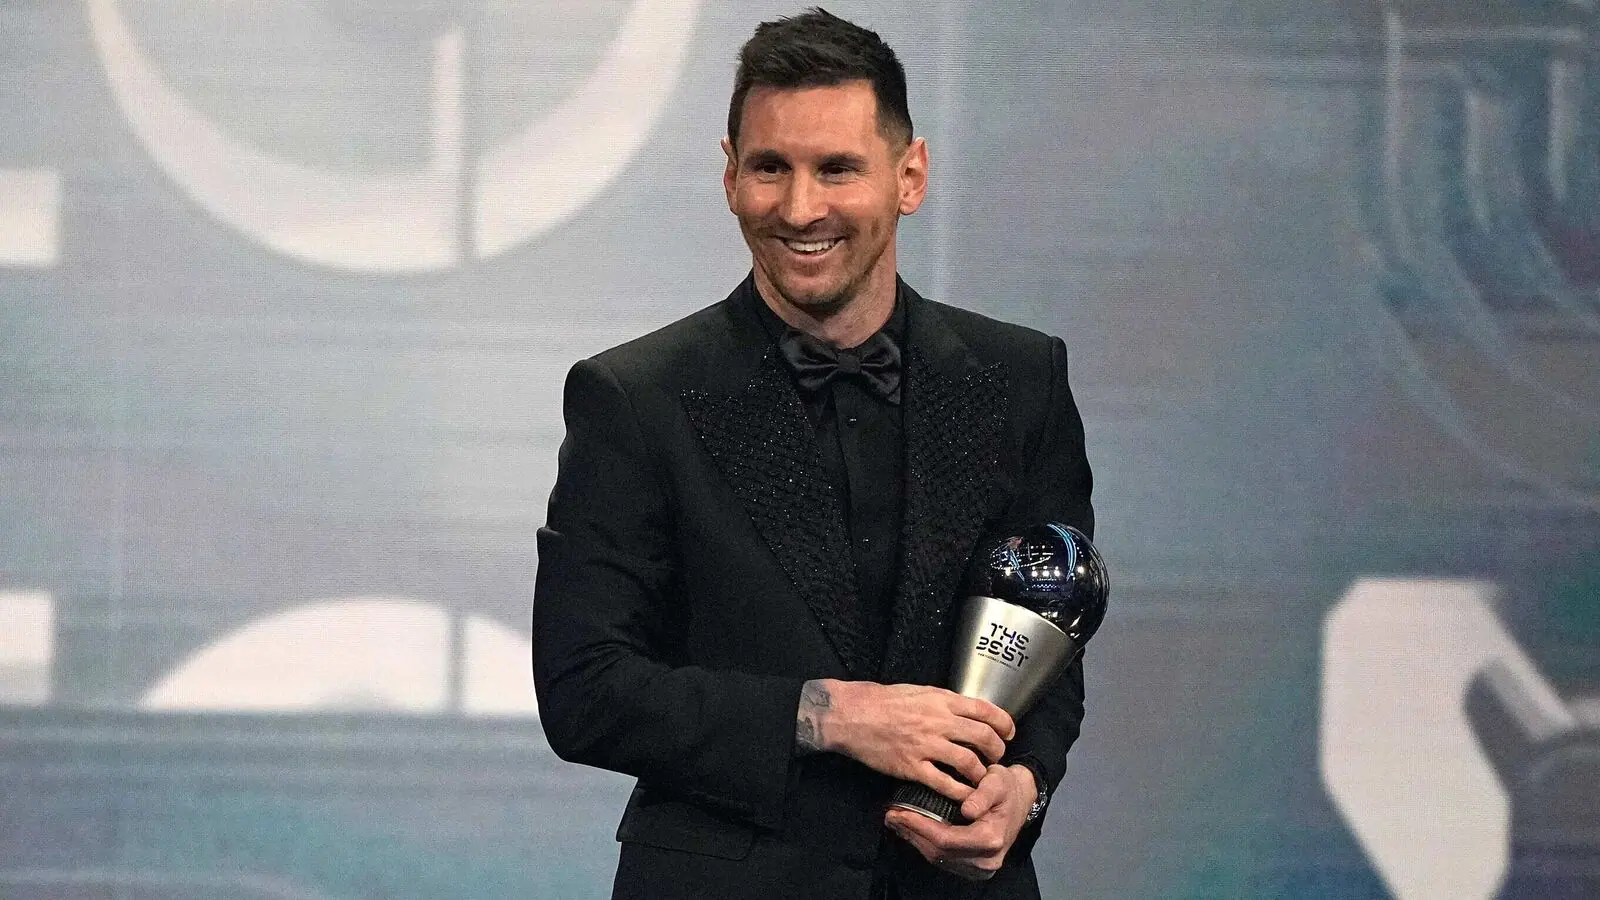 Lionel Messi wins FIFA "The Best" award for record 7th time